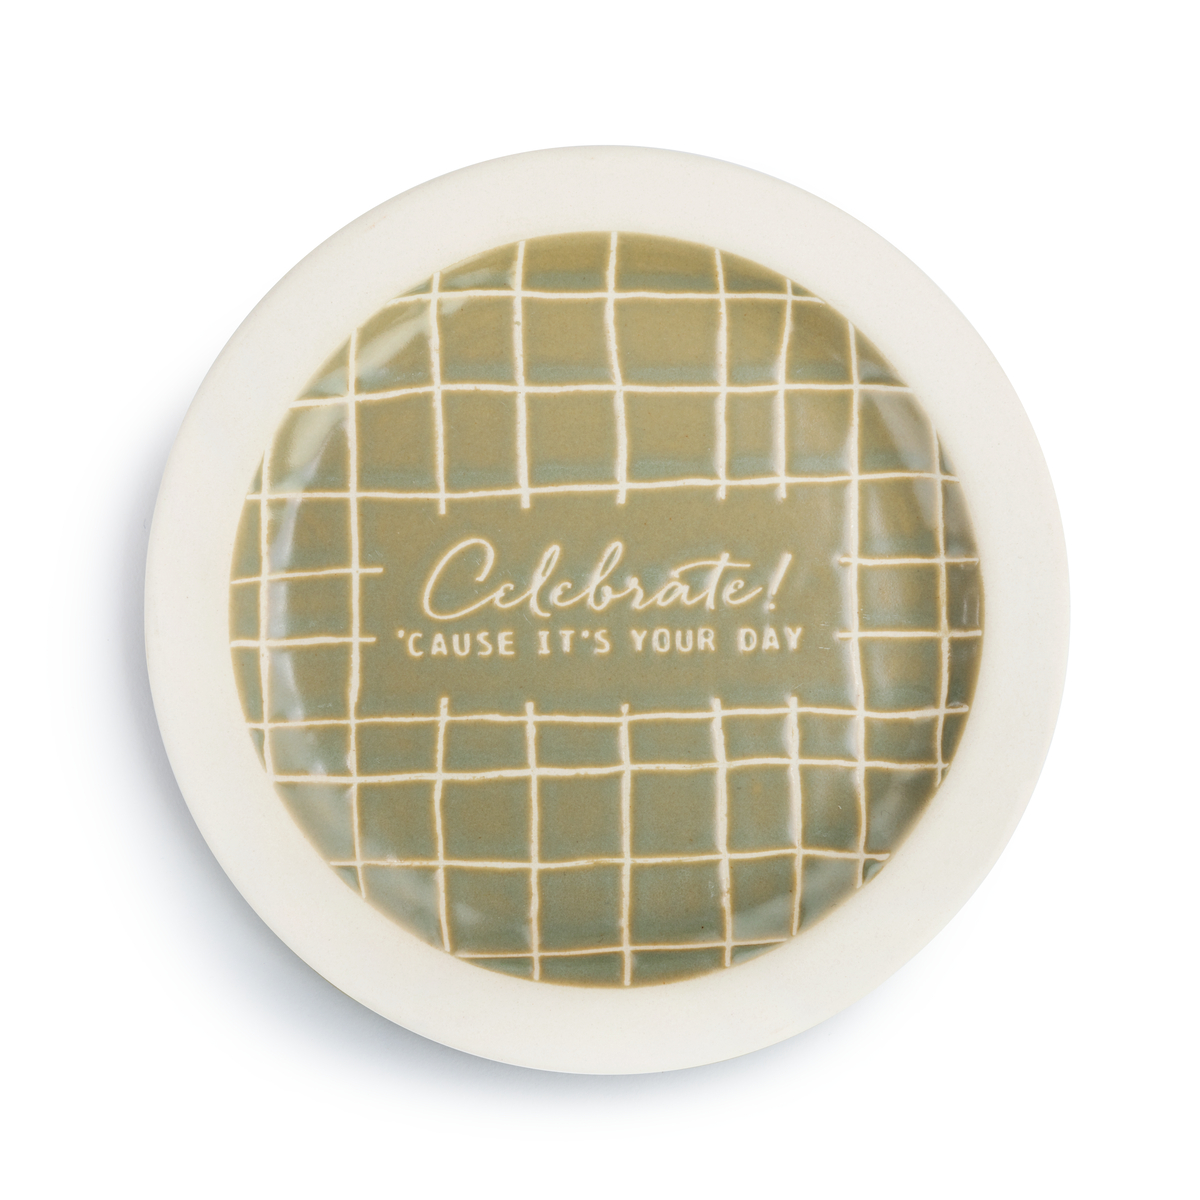 Your Day Celebration Plate